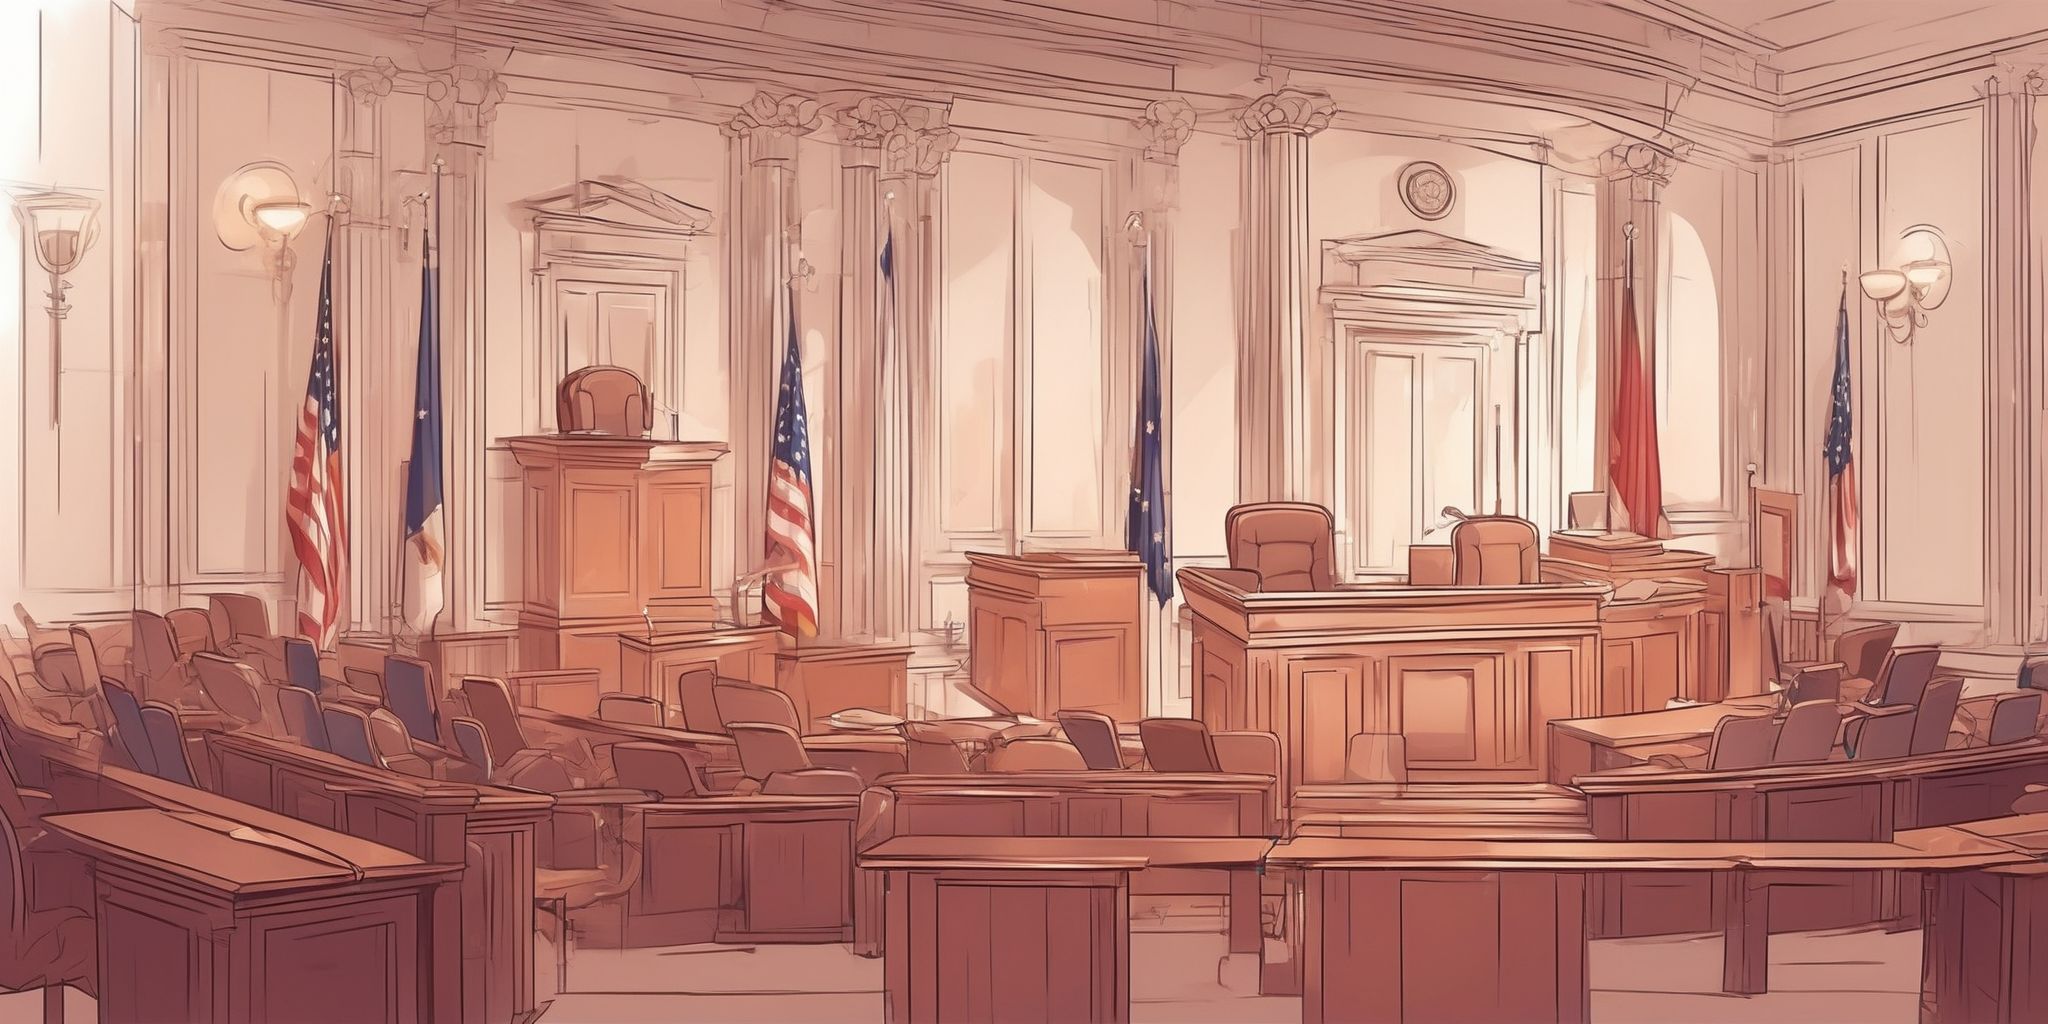 Online courtroom in illustration style with gradients and white background